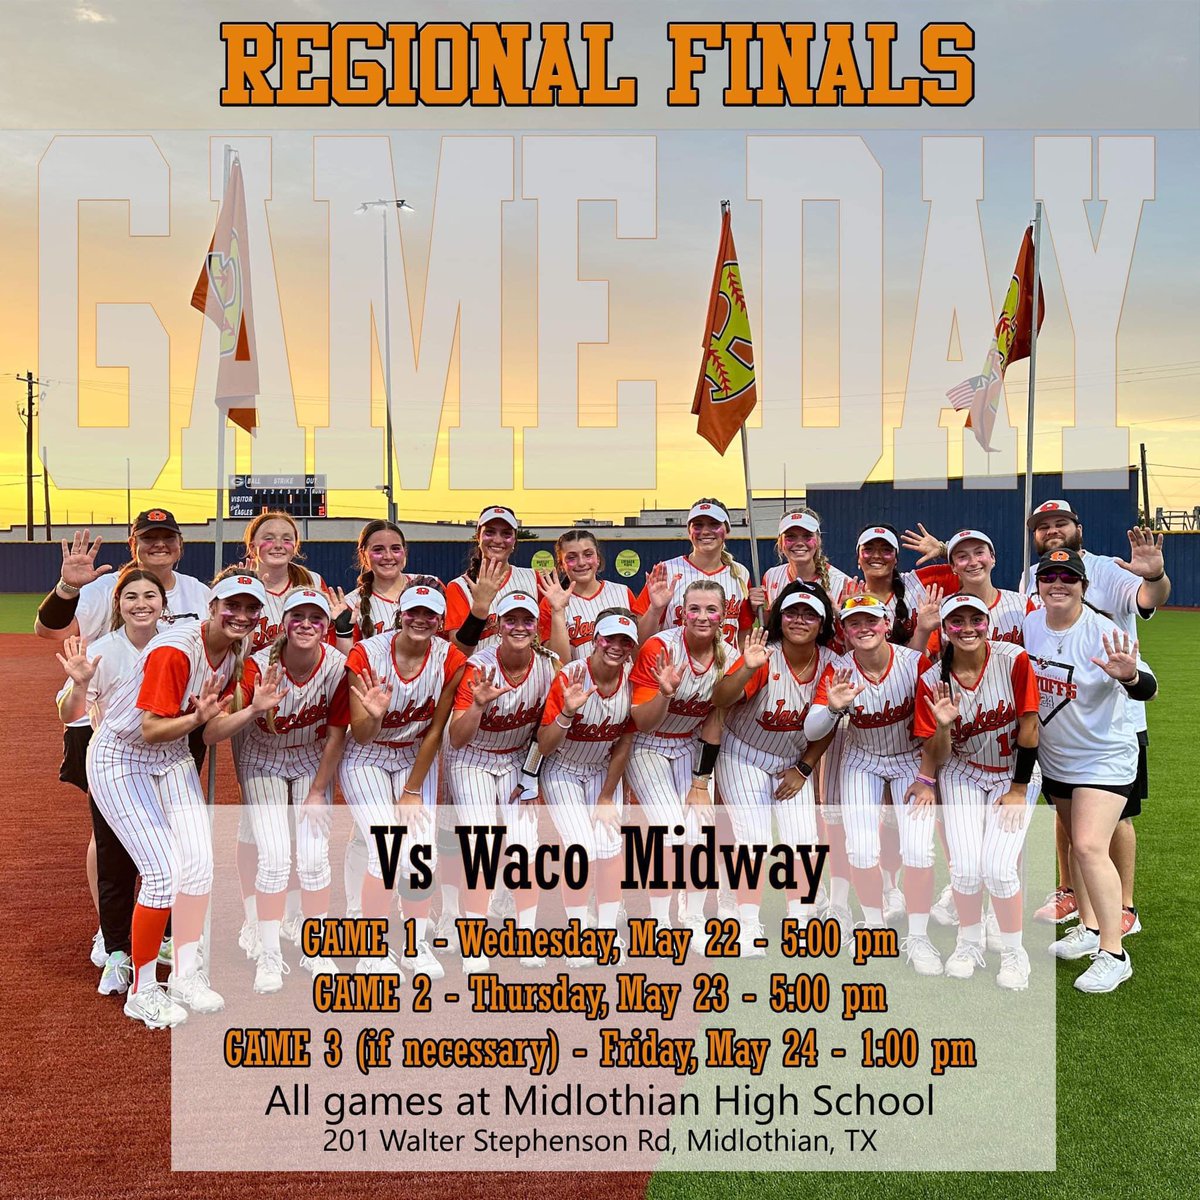 JACKET NATION- We need YOU!! Get the caravans ready and come support these girls in the Regional Championship Series!!! Winner advances to STATE!!